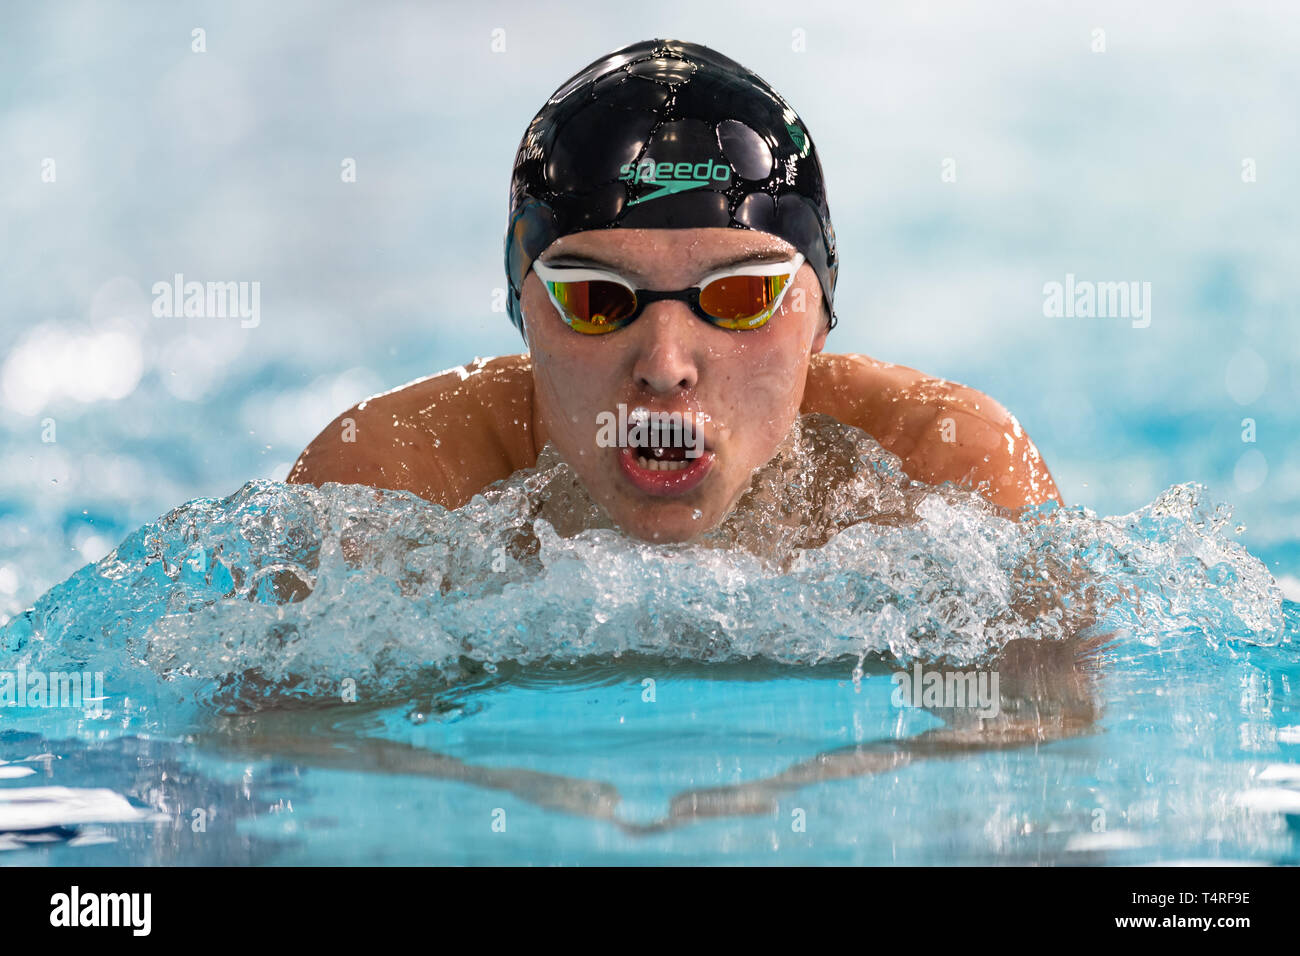 Glasgow, UK. 18th Apr, 2019. Giano Napolitano (University of Stirl) in Mens Open 400m IM during 3rd day of British Swimming Championships 2019 at Tollcross International Swimming Centre on Thursday, April 18, 2019 in Glasgow Scotland. Credit: Taka G Wu/Alamy Live News Stock Photo